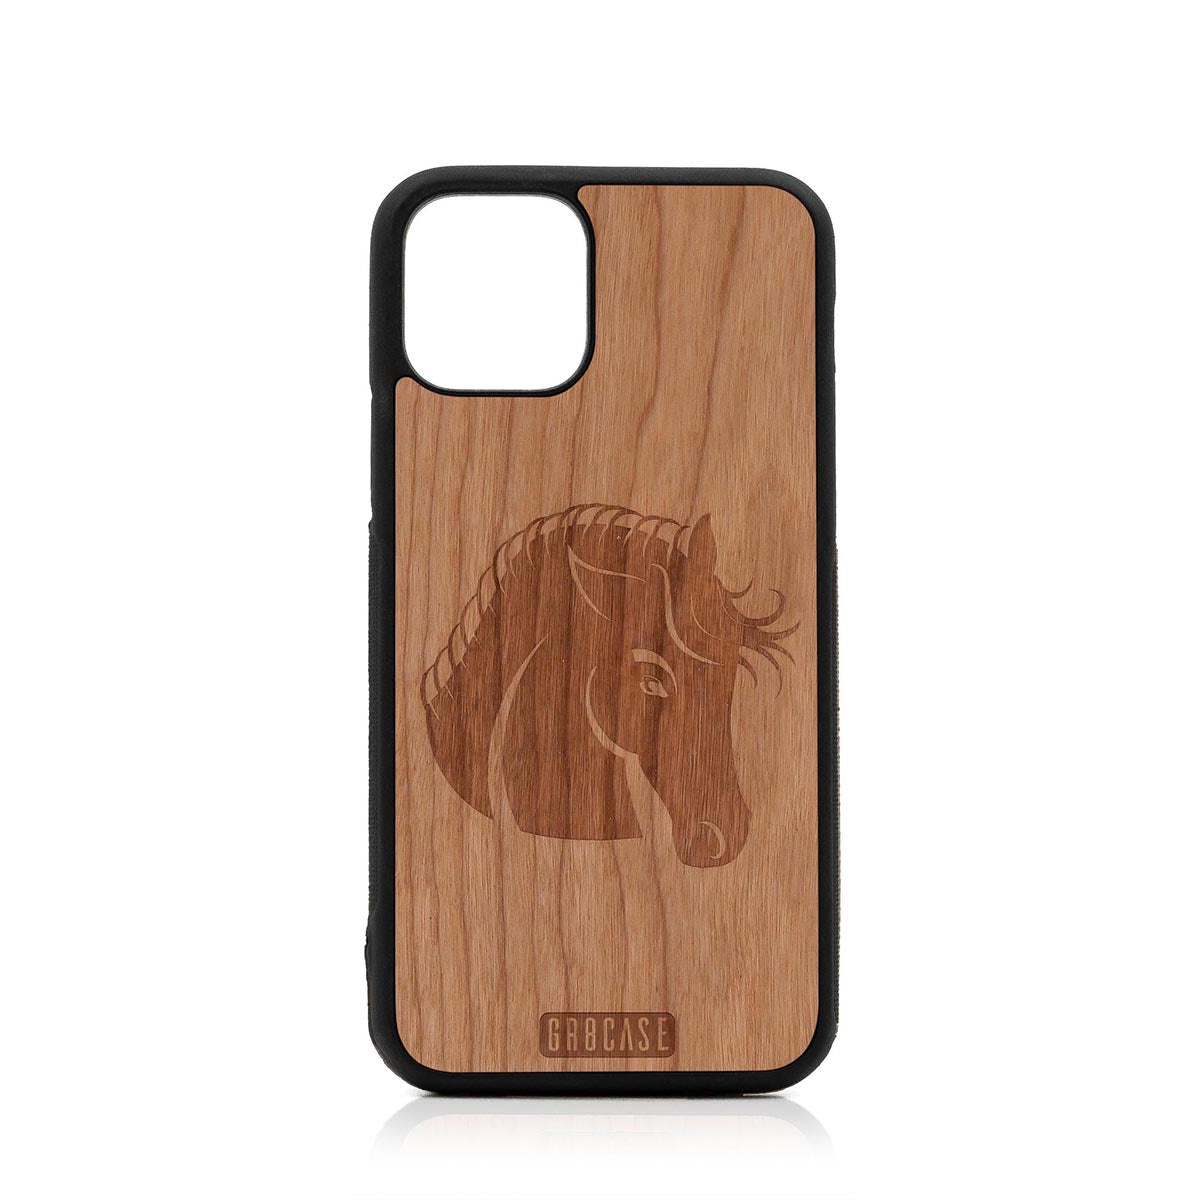 Horse Design Wood Case For iPhone 11 Pro by GR8CASE